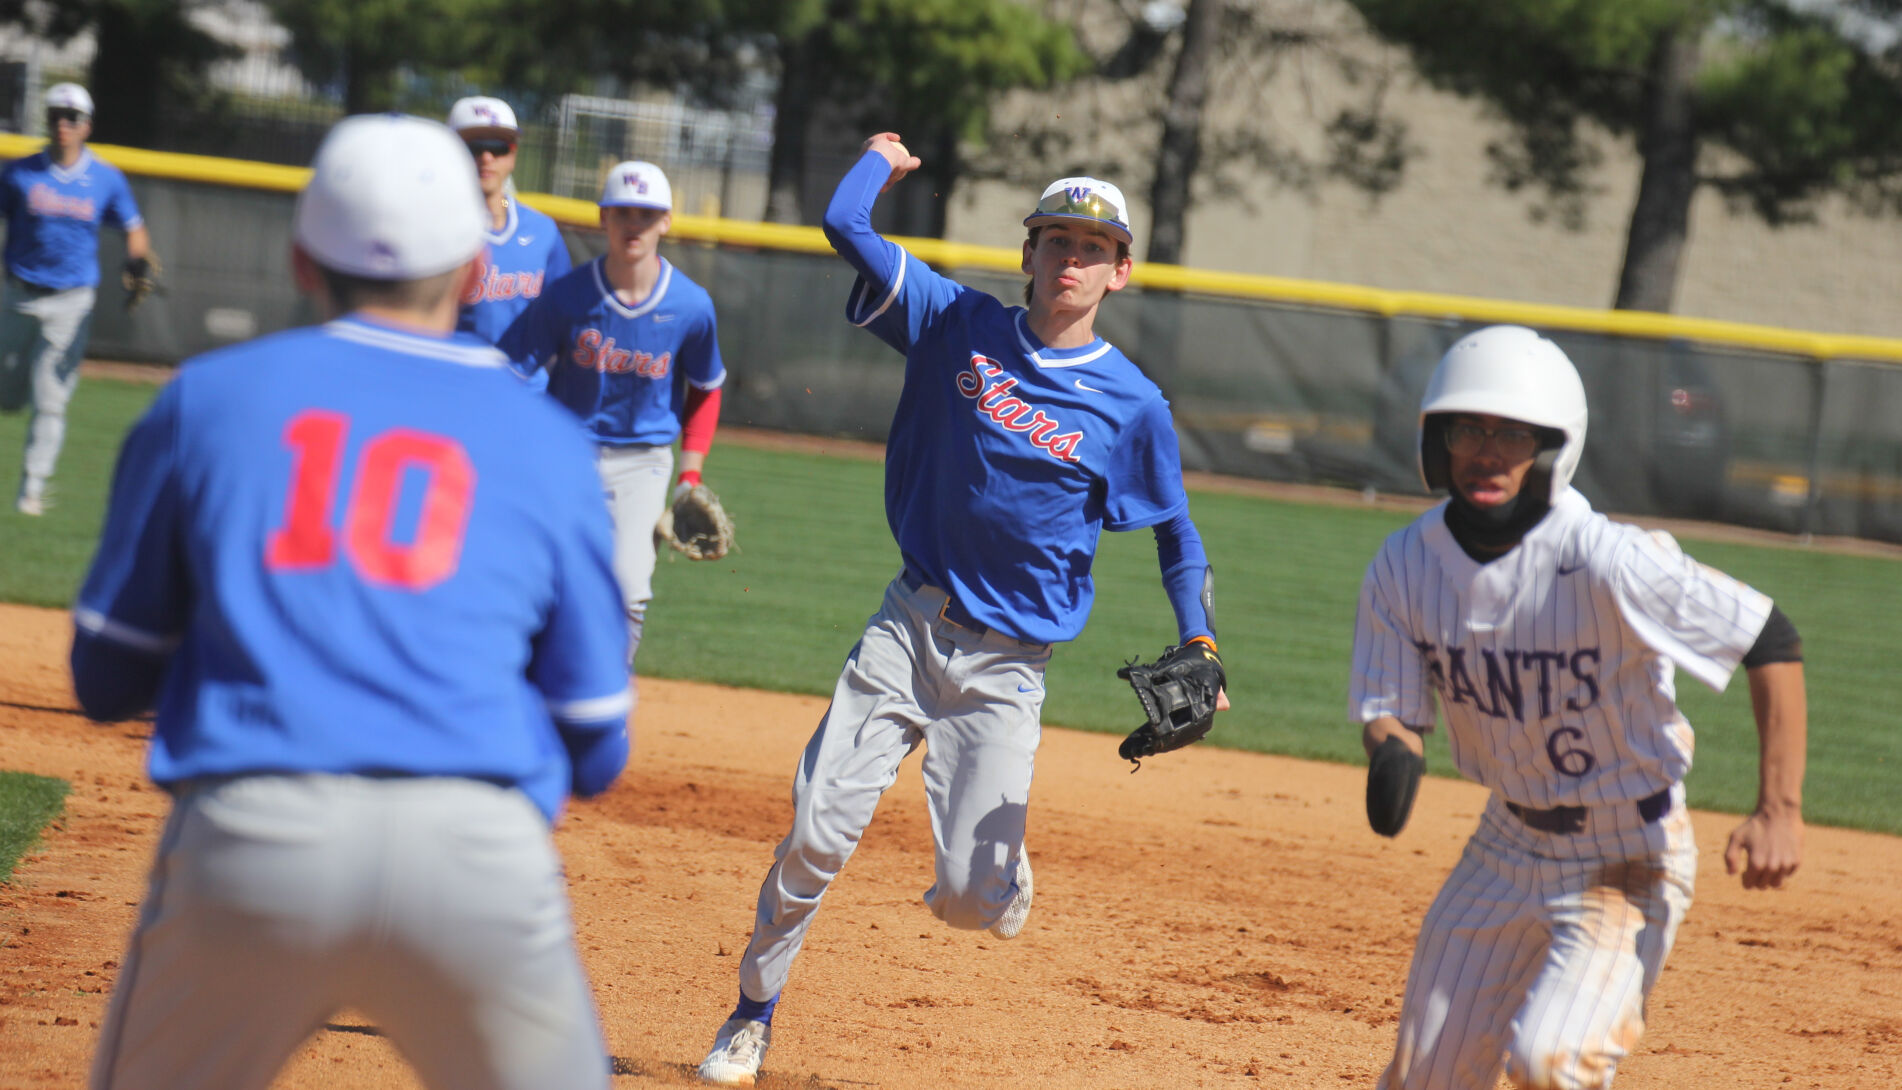 Western Boone Baseball Team Finds Silver Lining in 10-0 Loss to Ben Davis